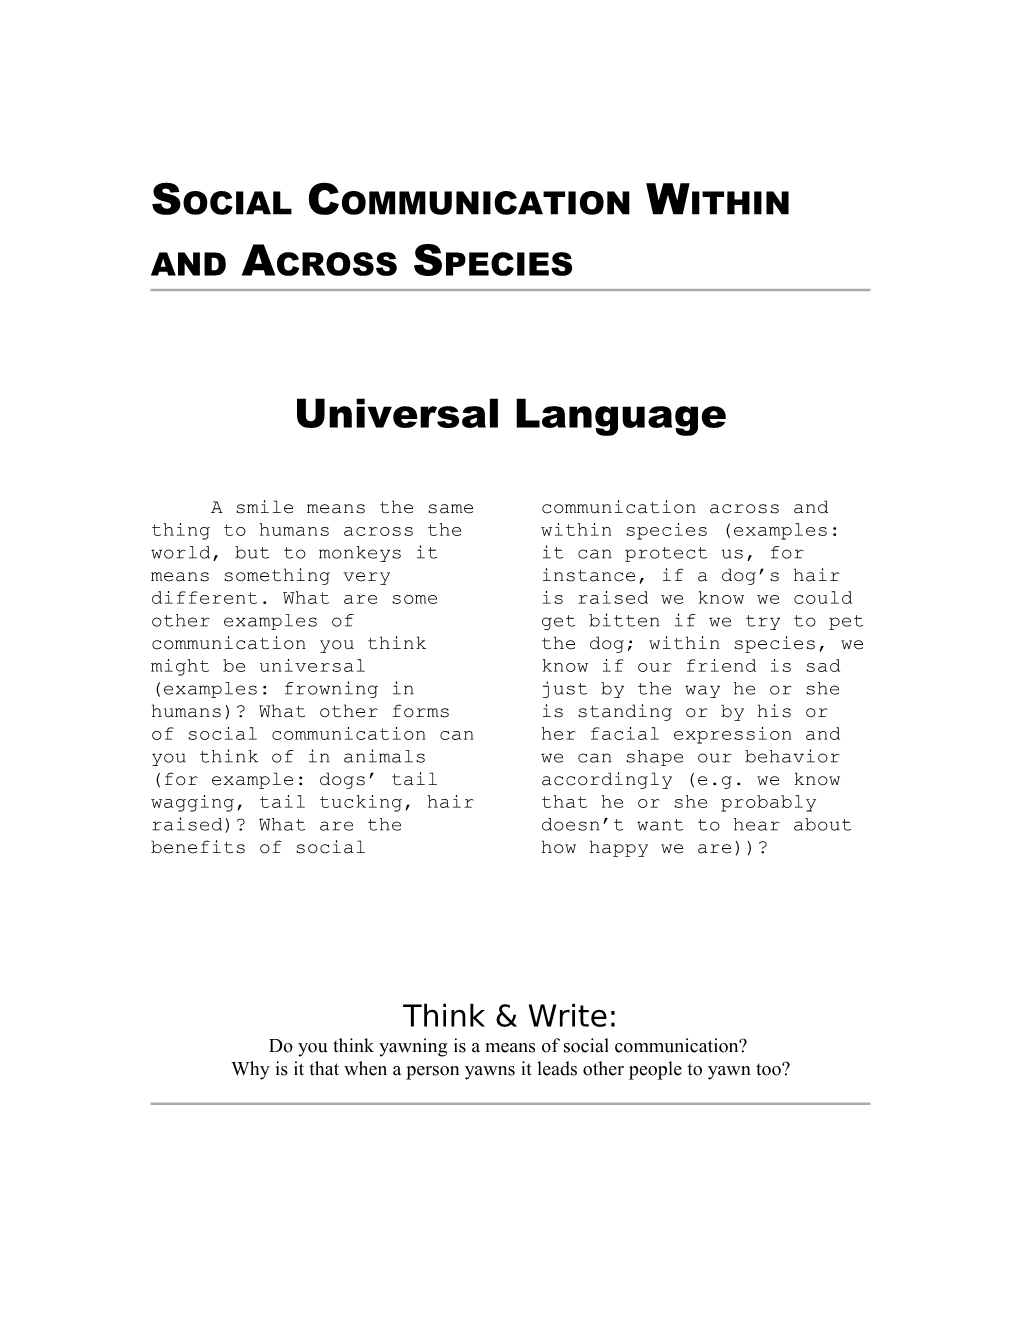 Social Communication Within and Across Species